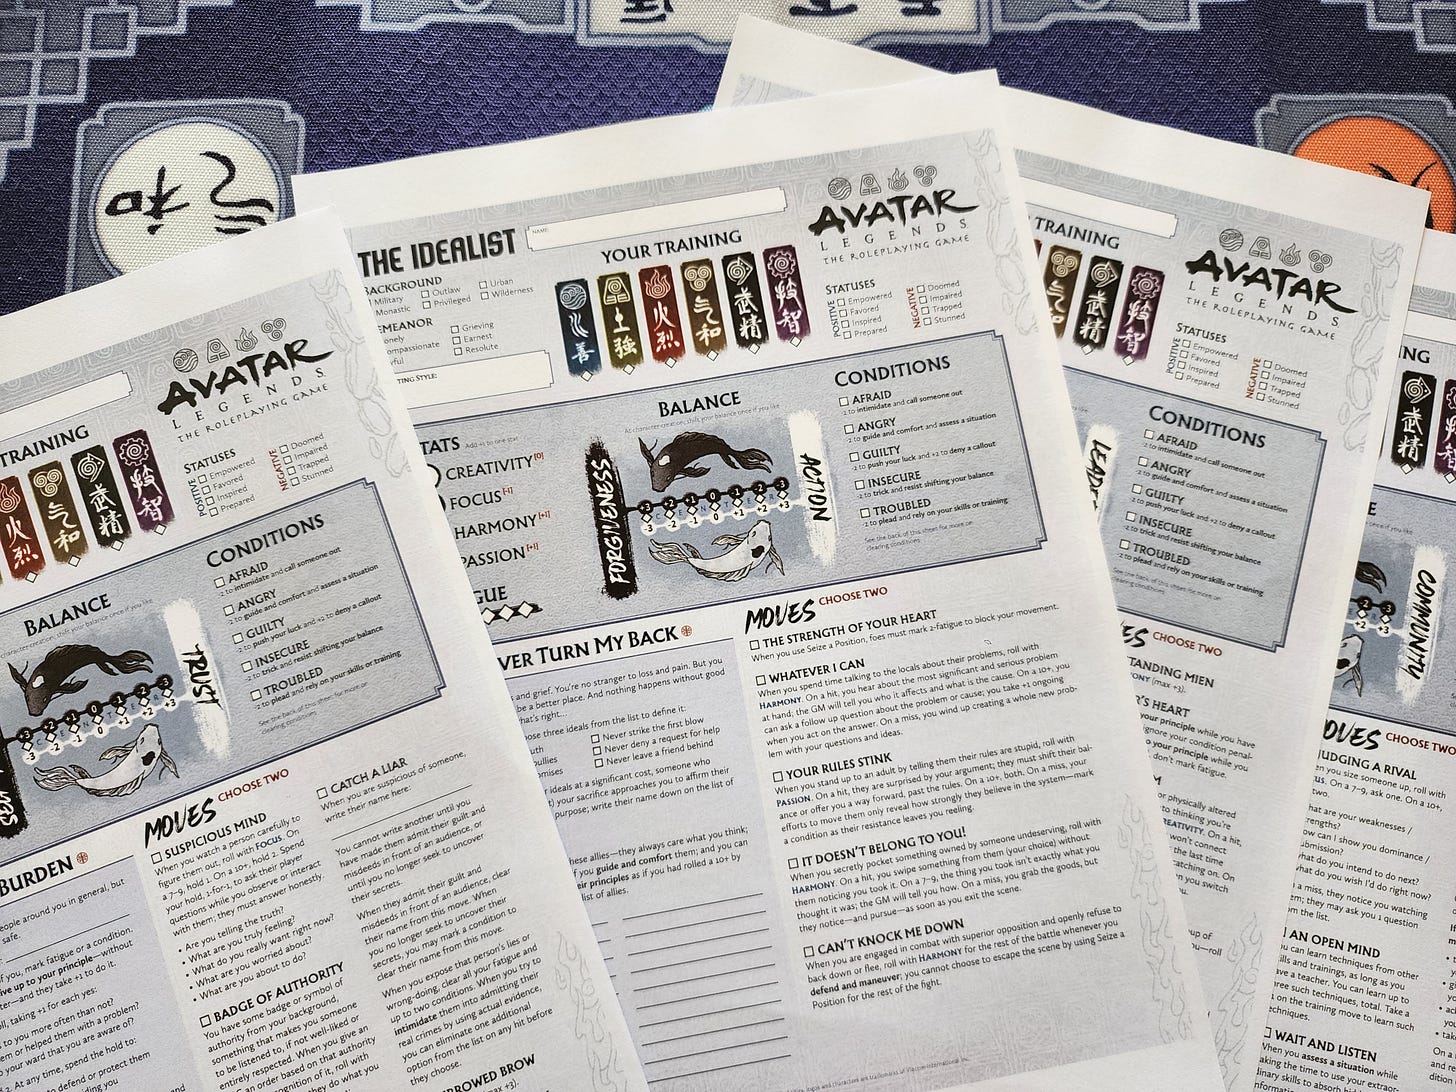 A spread of four character sheets from the Avatar Legends Tabletop Role Playing Game